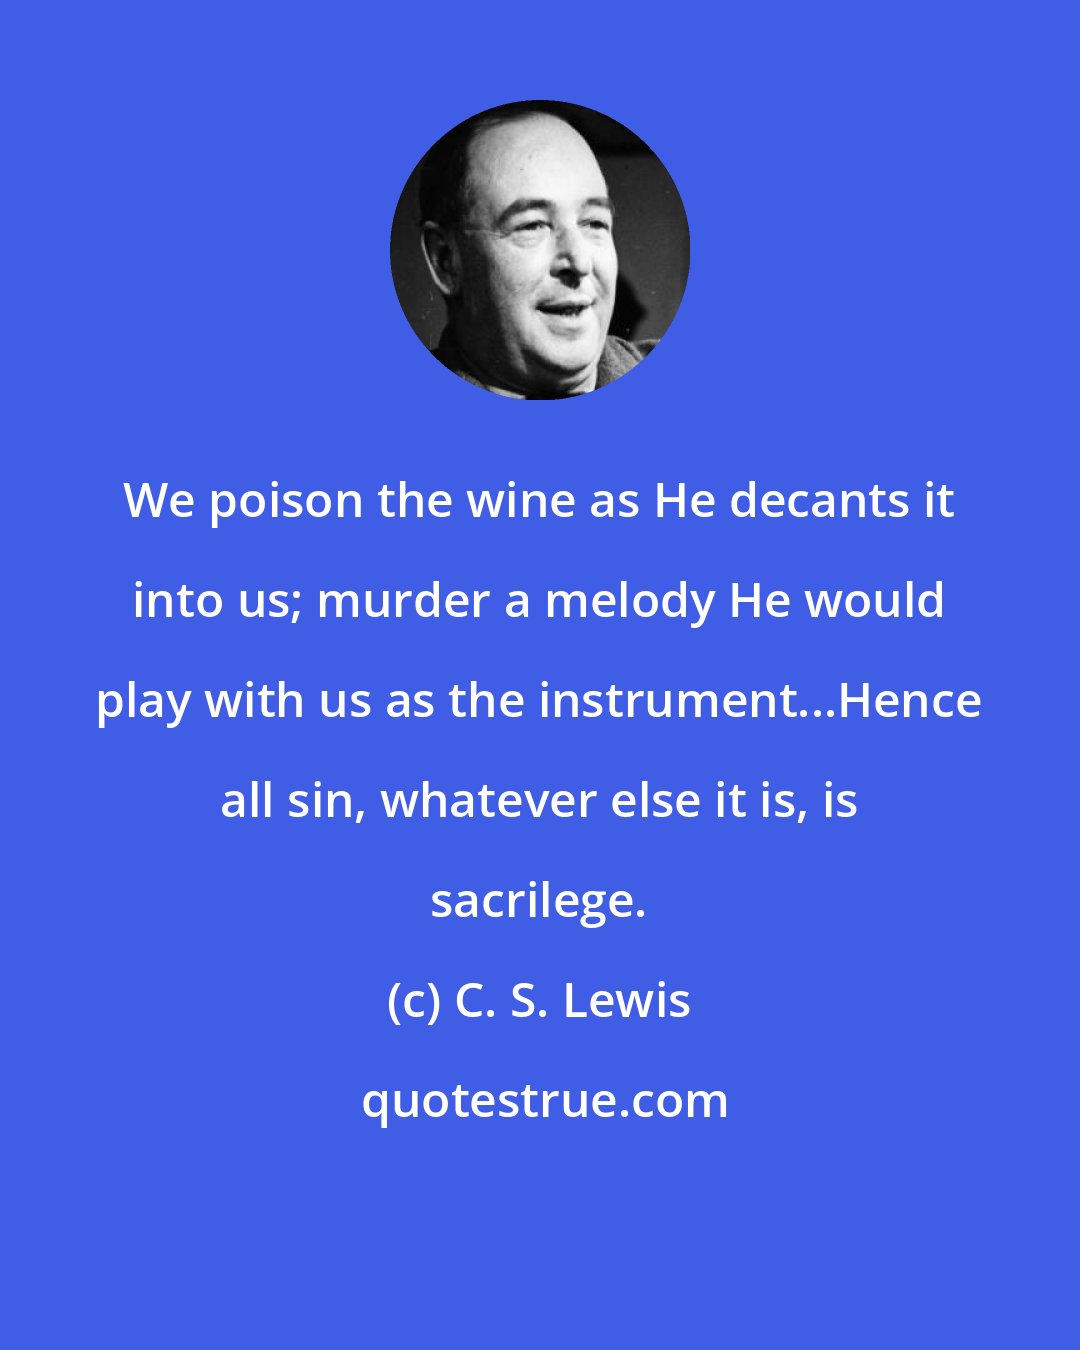 C. S. Lewis: We poison the wine as He decants it into us; murder a melody He would play with us as the instrument...Hence all sin, whatever else it is, is sacrilege.